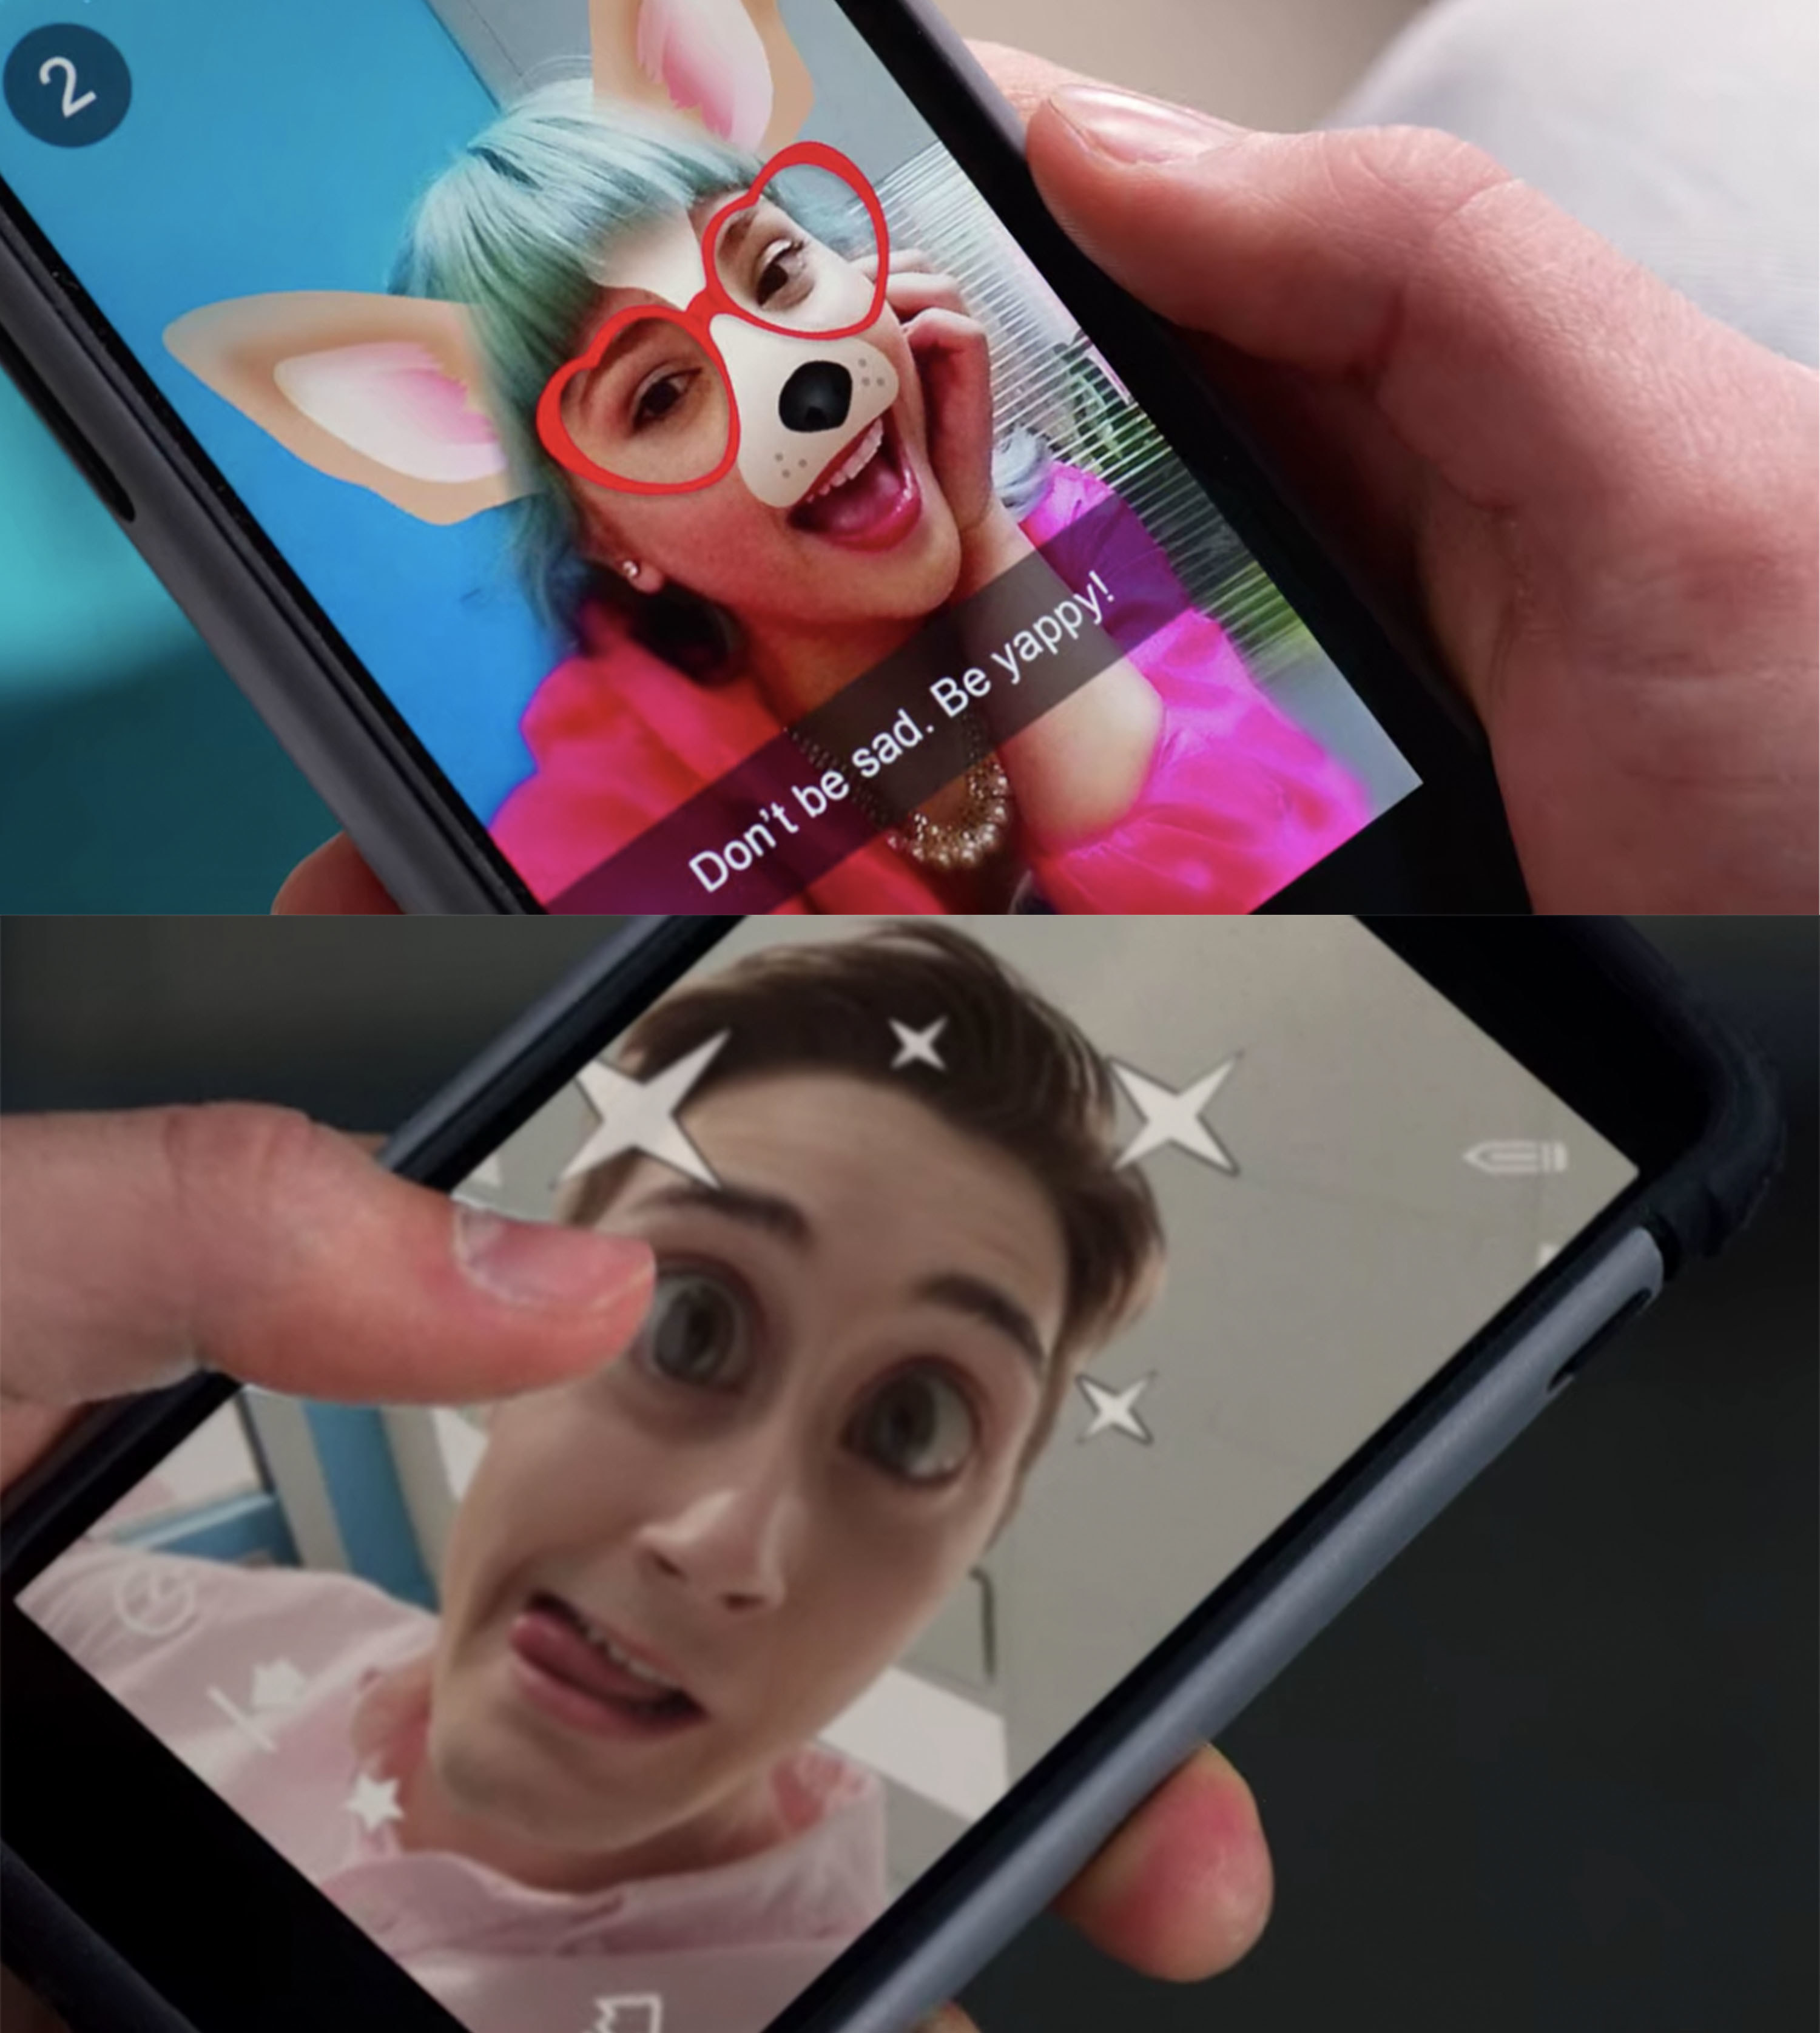 Lola and Miles send each other funny pictures with cute filters